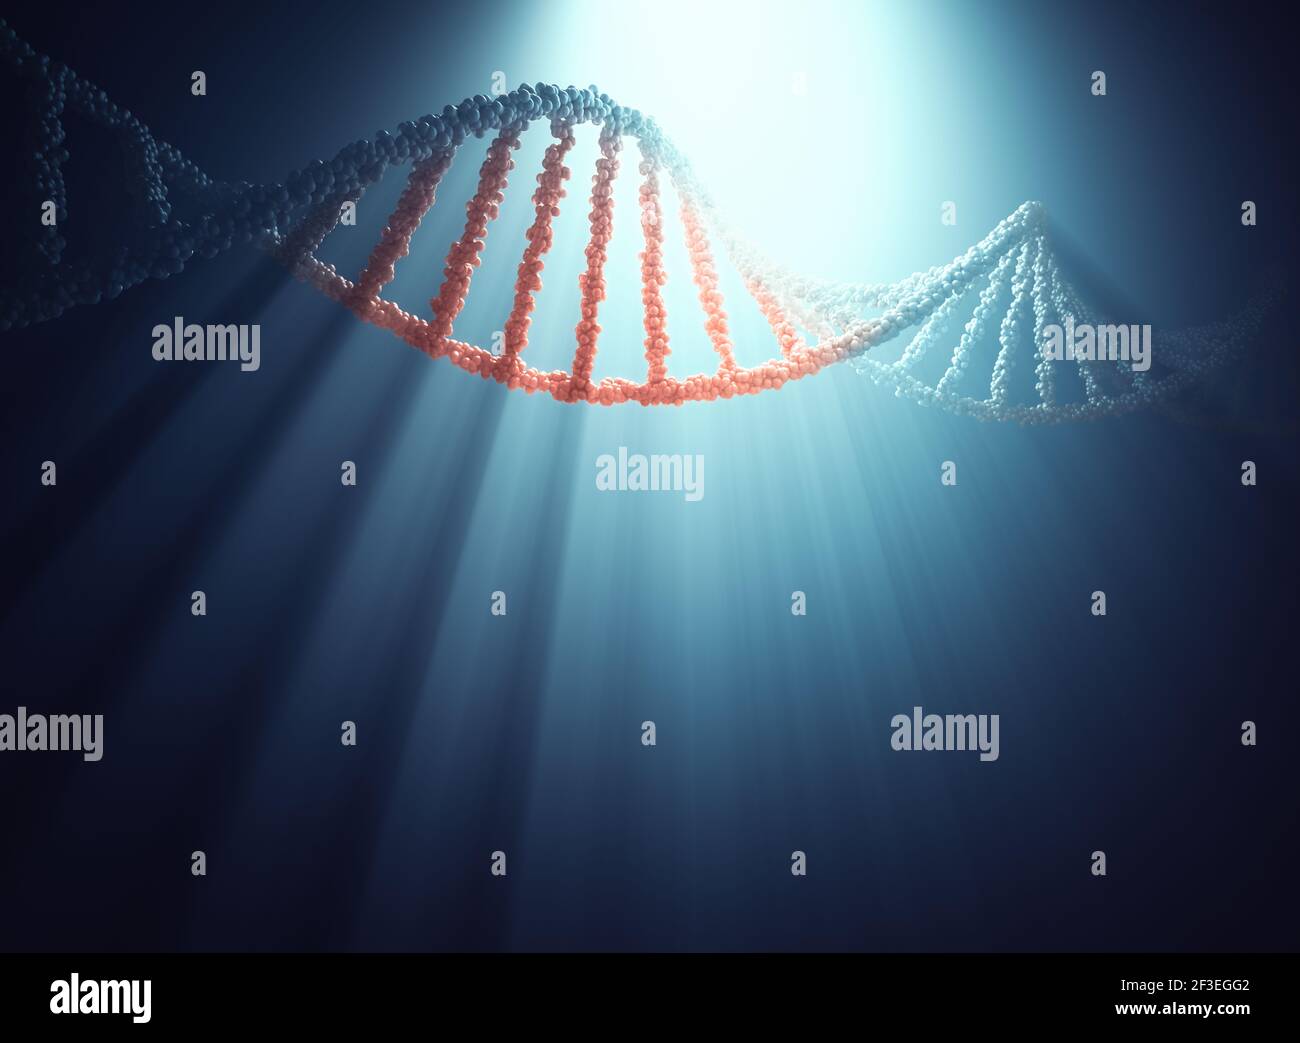 DNA molecule with back light creating shadow and beams of light. 3D illustration with clipping path included. Stock Photo